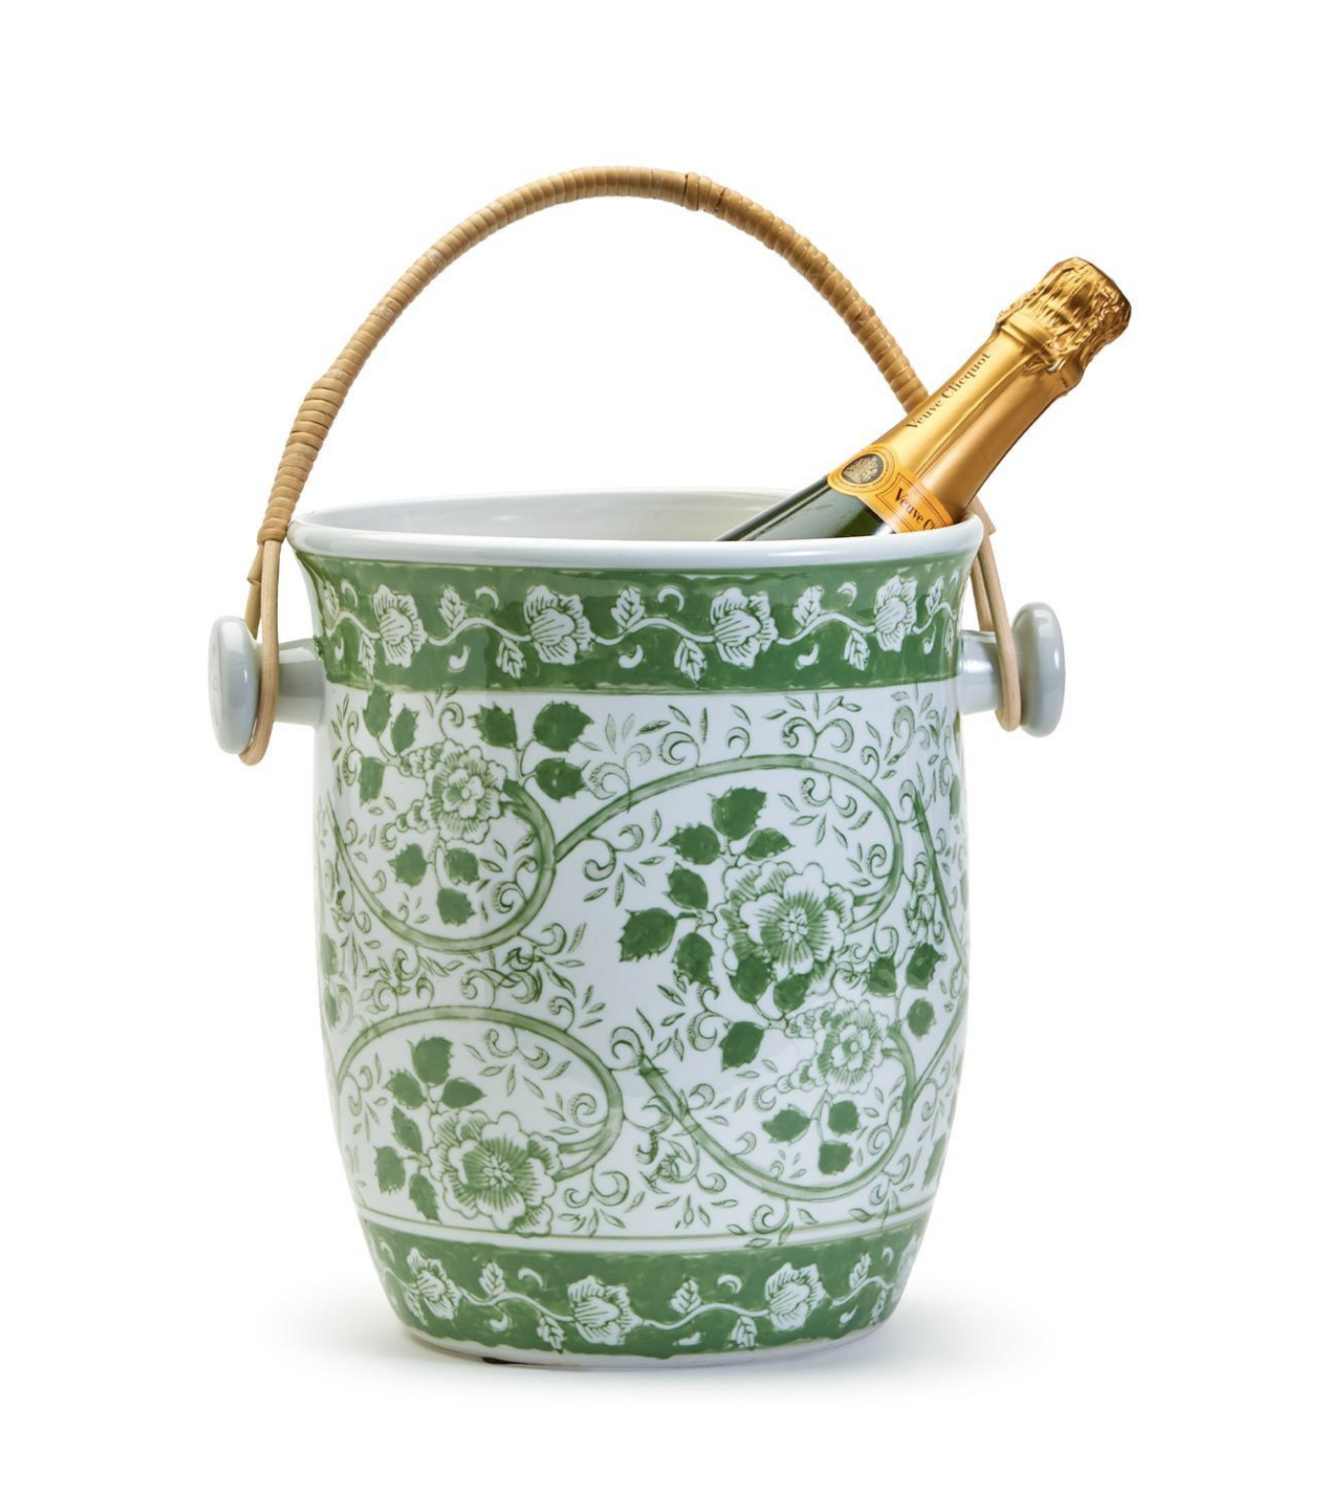 Countryside Cooler Bucket with Woven Cane Handle